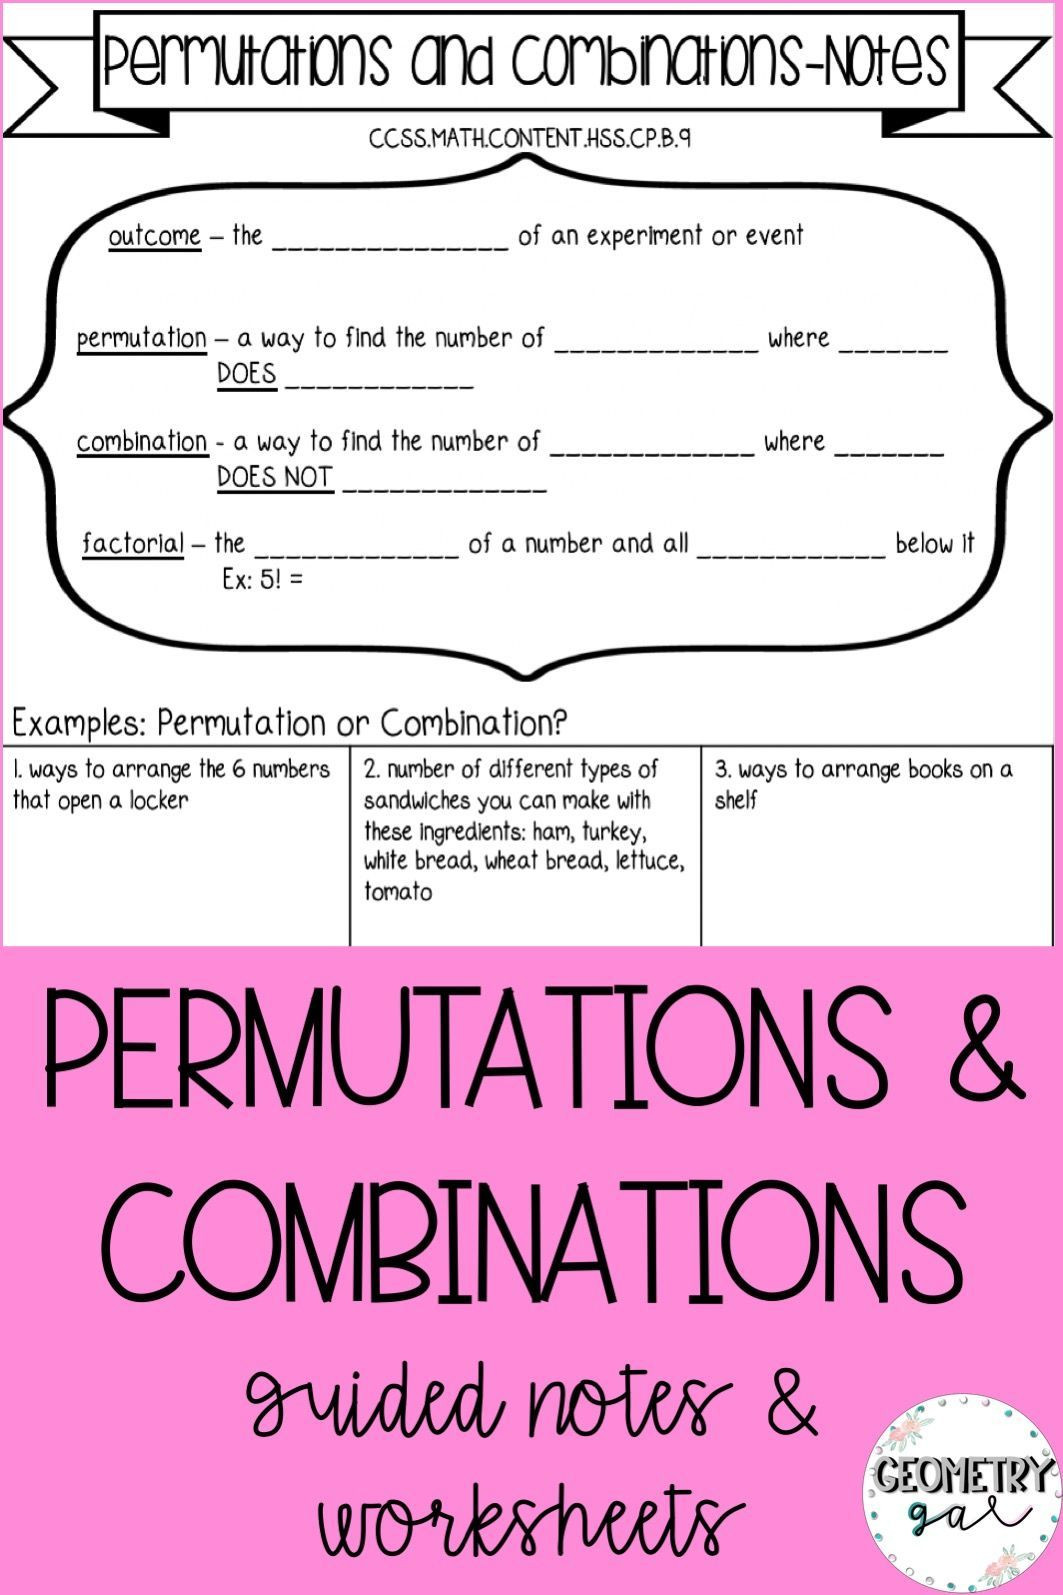 Permutations and Combinations Worksheet Permutations and Binations Guided Notes and Worksheets